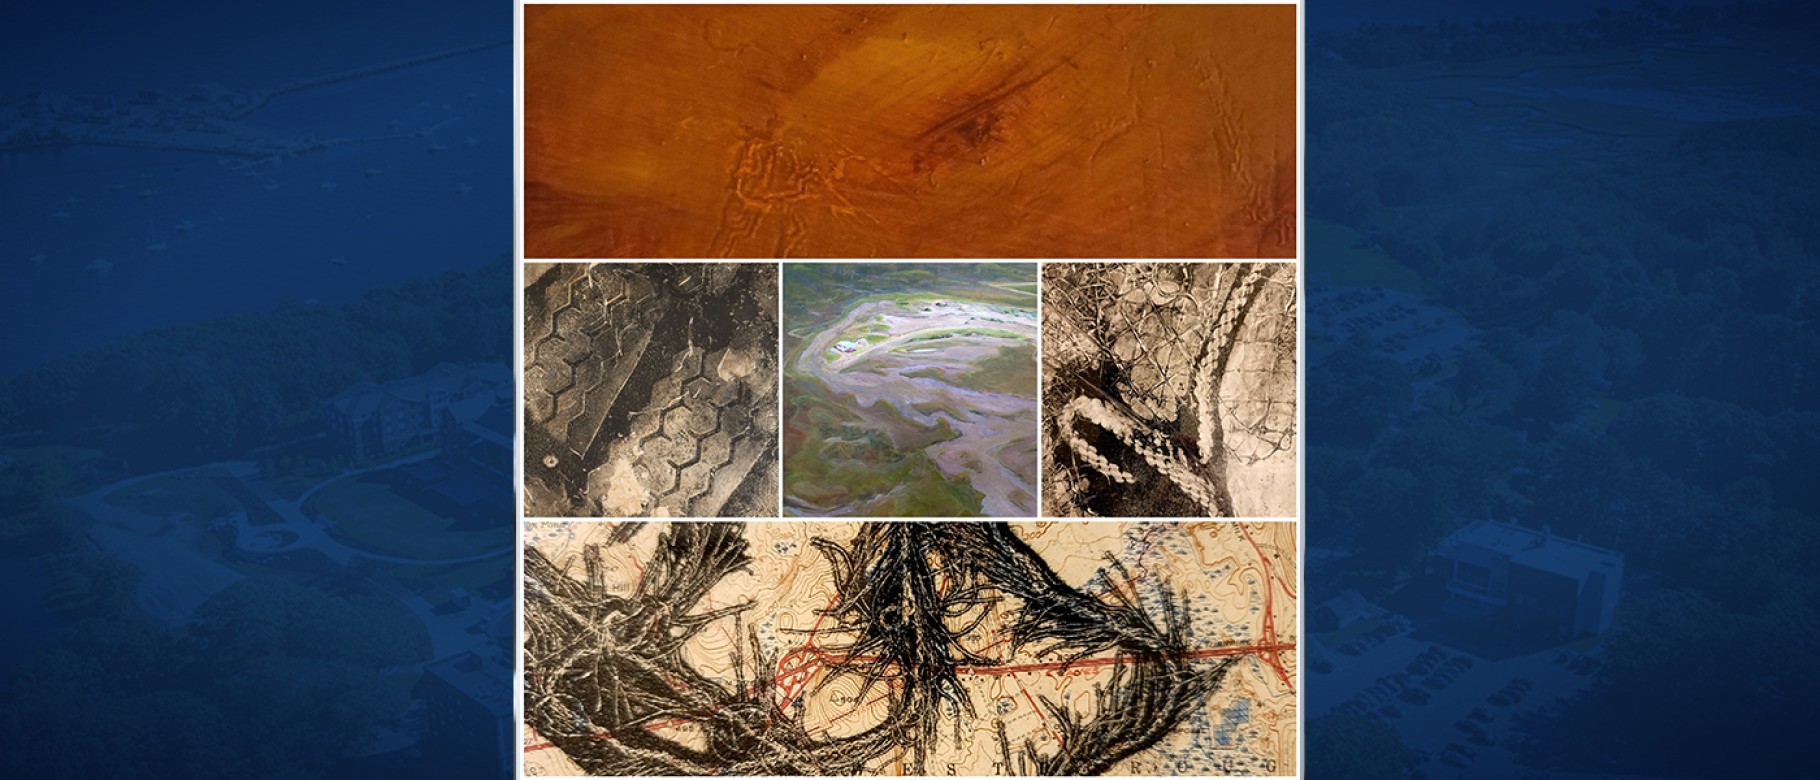 A collage of images from the exhibit "Paradox of Landscape" — includes prints and paintings of tire treads, waterways, and fisherman's rope